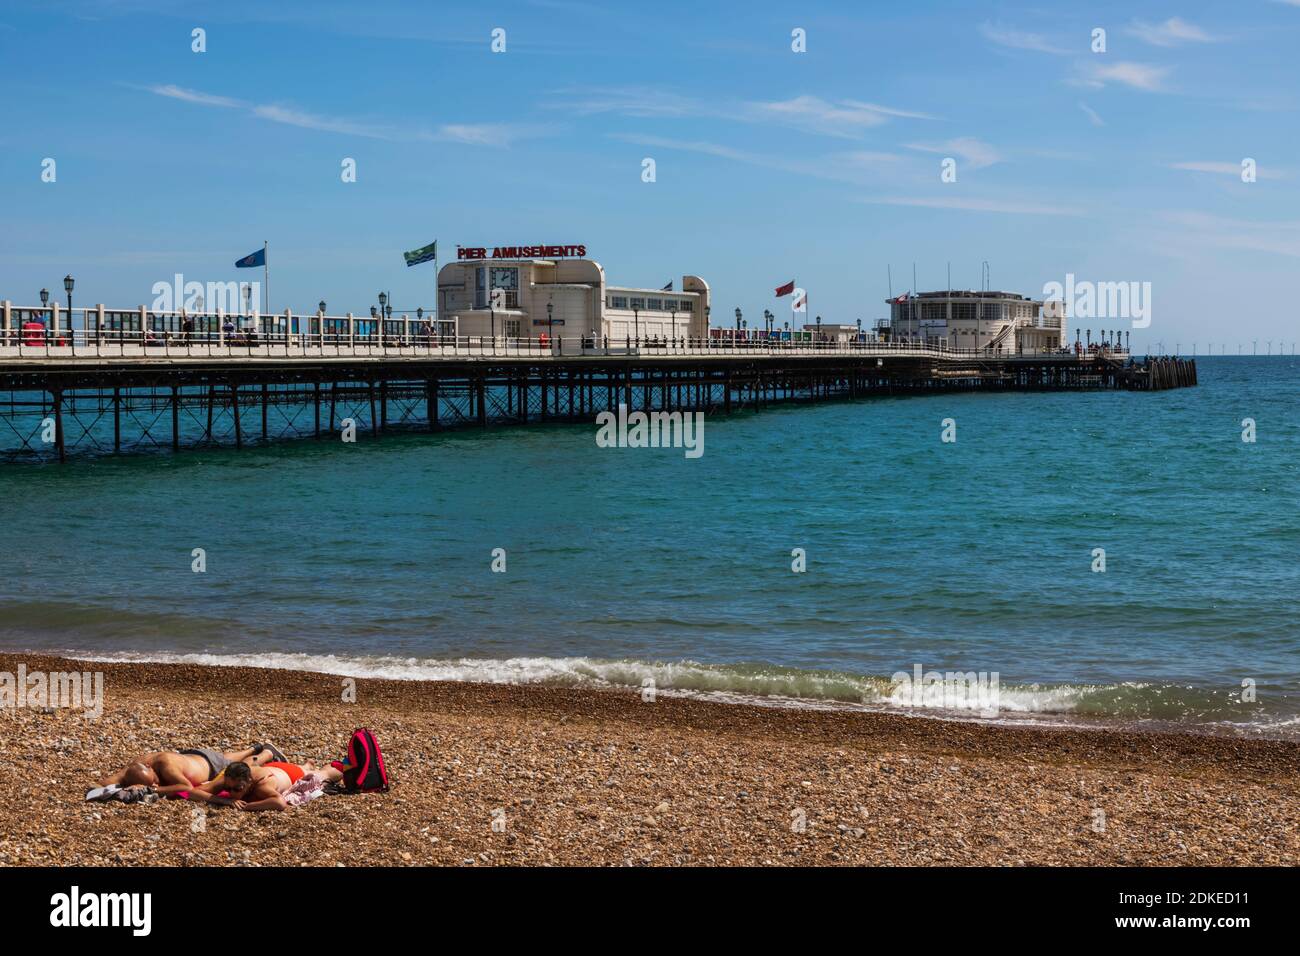 Inghilterra, West Sussex, Worthing, Worthing Beach, coppia prendere il sole sulla spiaggia con Pier in background Foto Stock